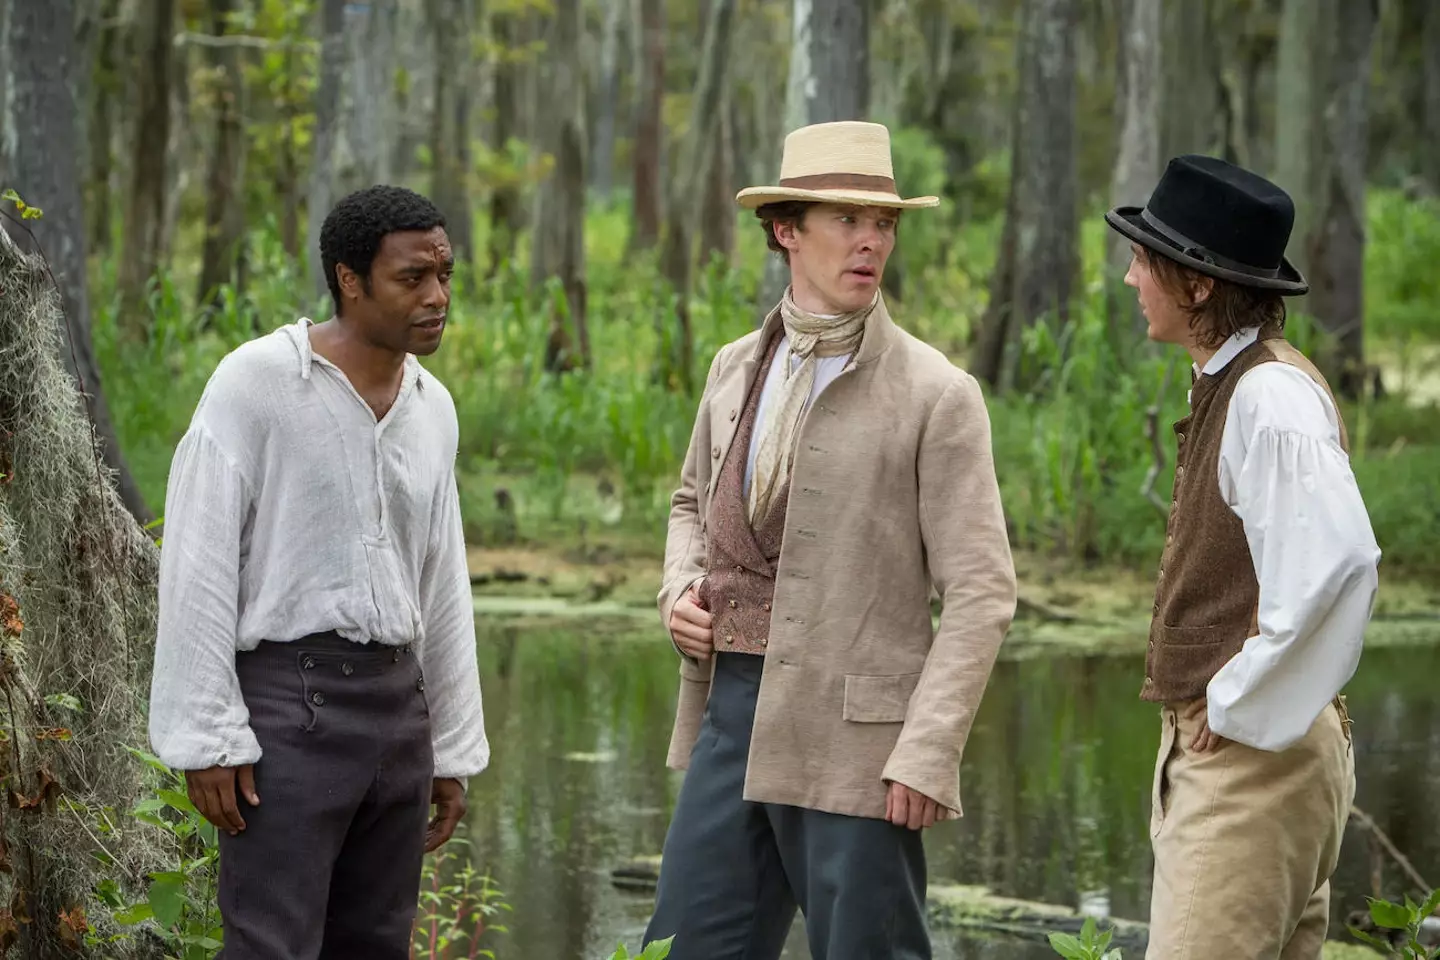 The actor starred as plantation owner Master William Ford in 12 Years A Slave.